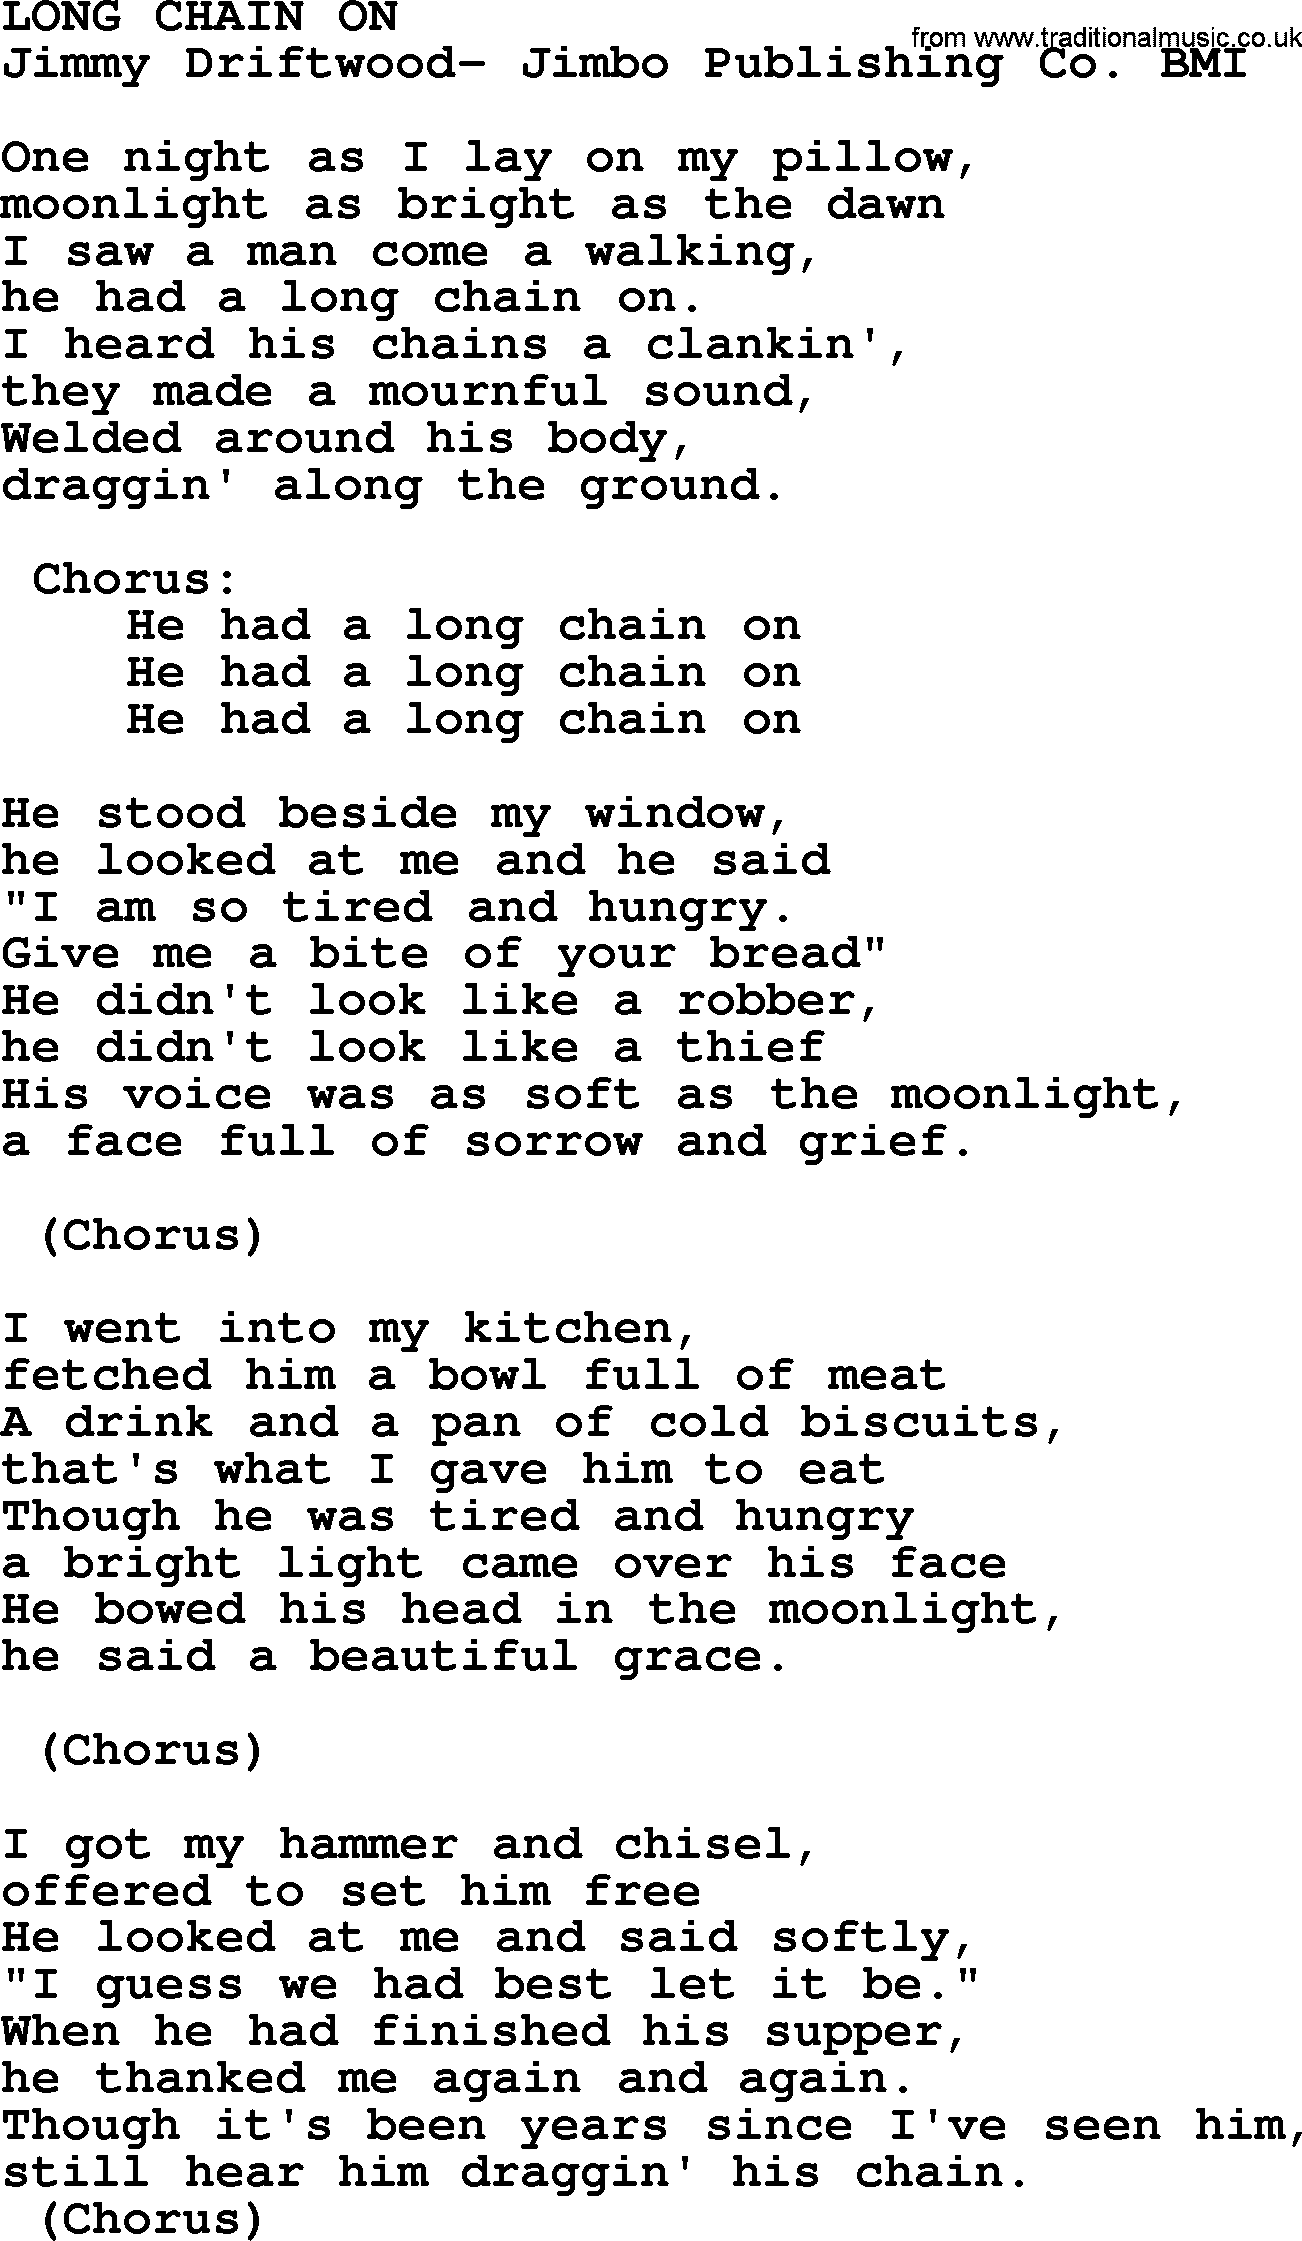 Peter, Paul and Mary song Long Chain On lyrics